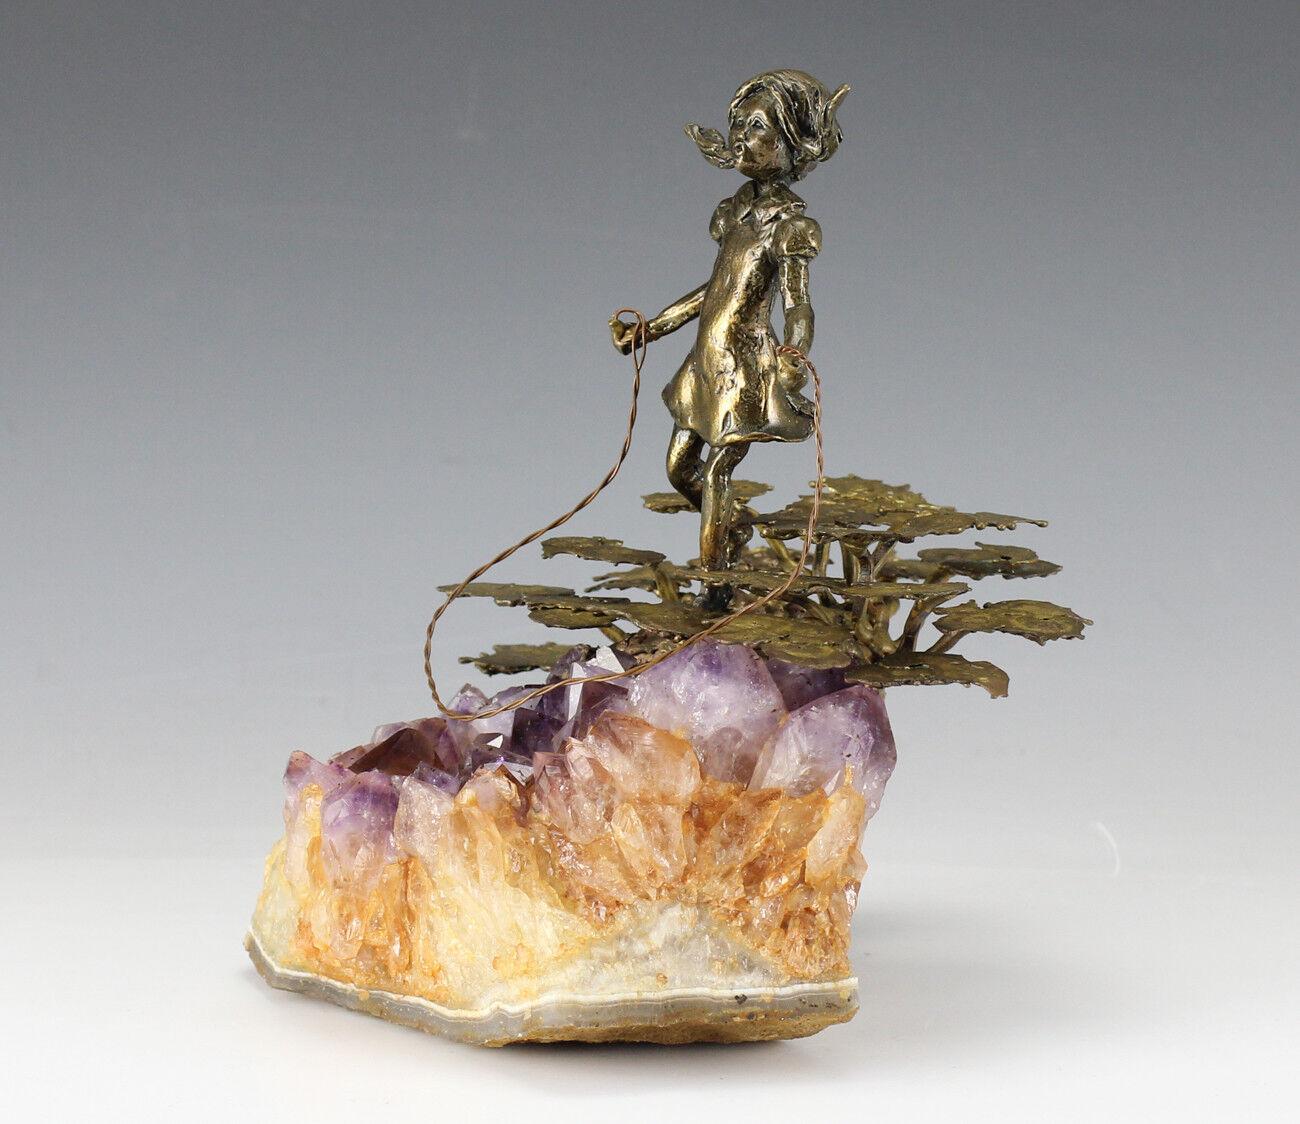 Bronze Sculpture on Amethyst Crystals - Small Girl Jumping Rope

Small girl jumping rope amidst leafy outcroppings. Second half 20th century, unsigned.

Additional Information:
Region of Origin: US 
Subject: Figures & Nudes 
Material: